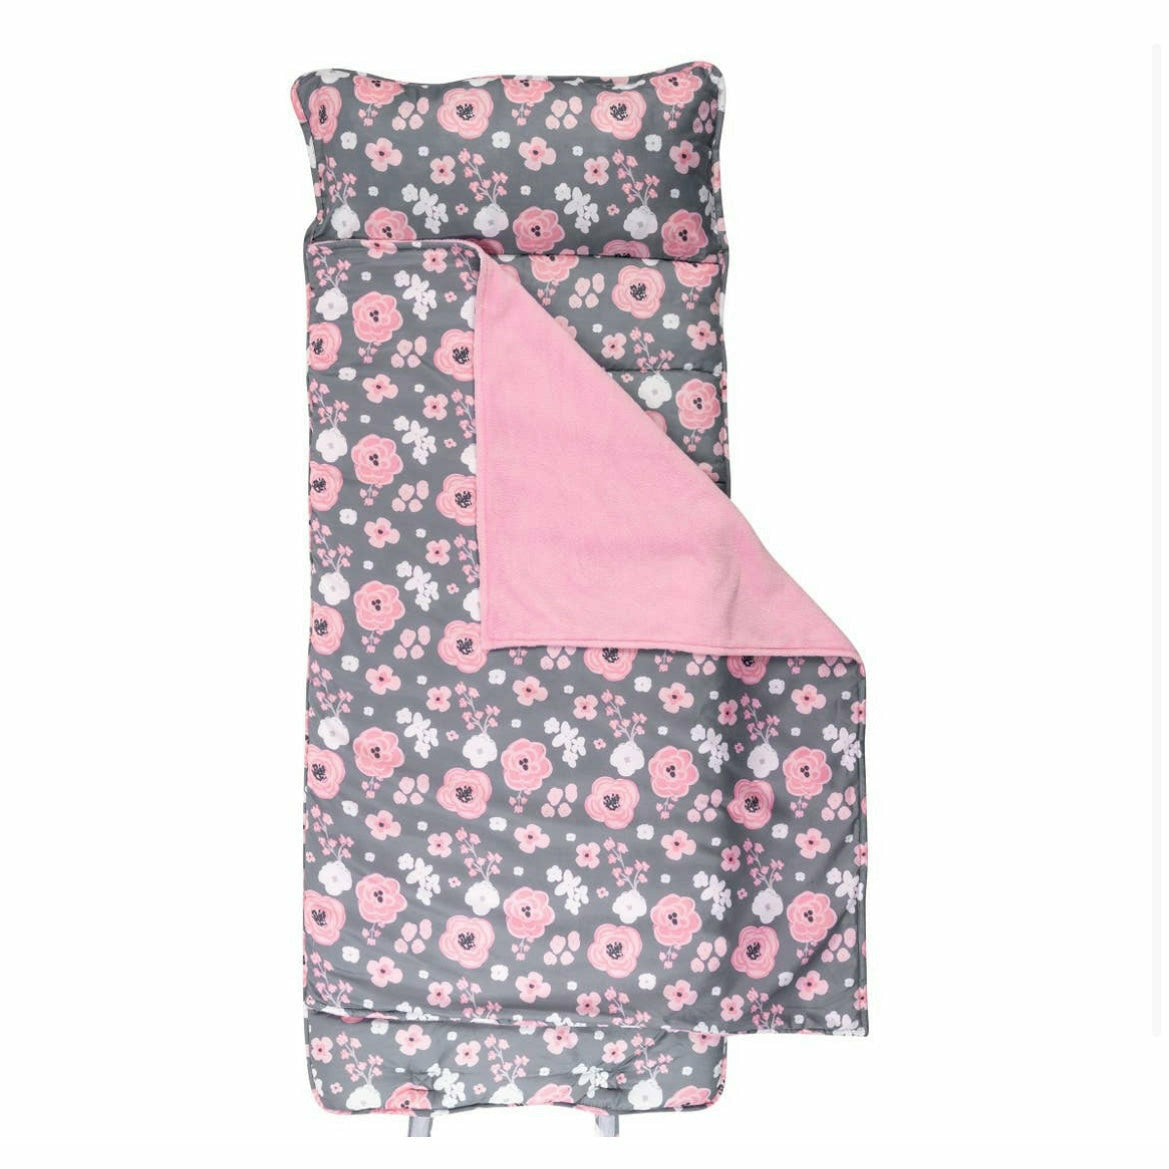 Buy floral Printed All Over Nap Mat